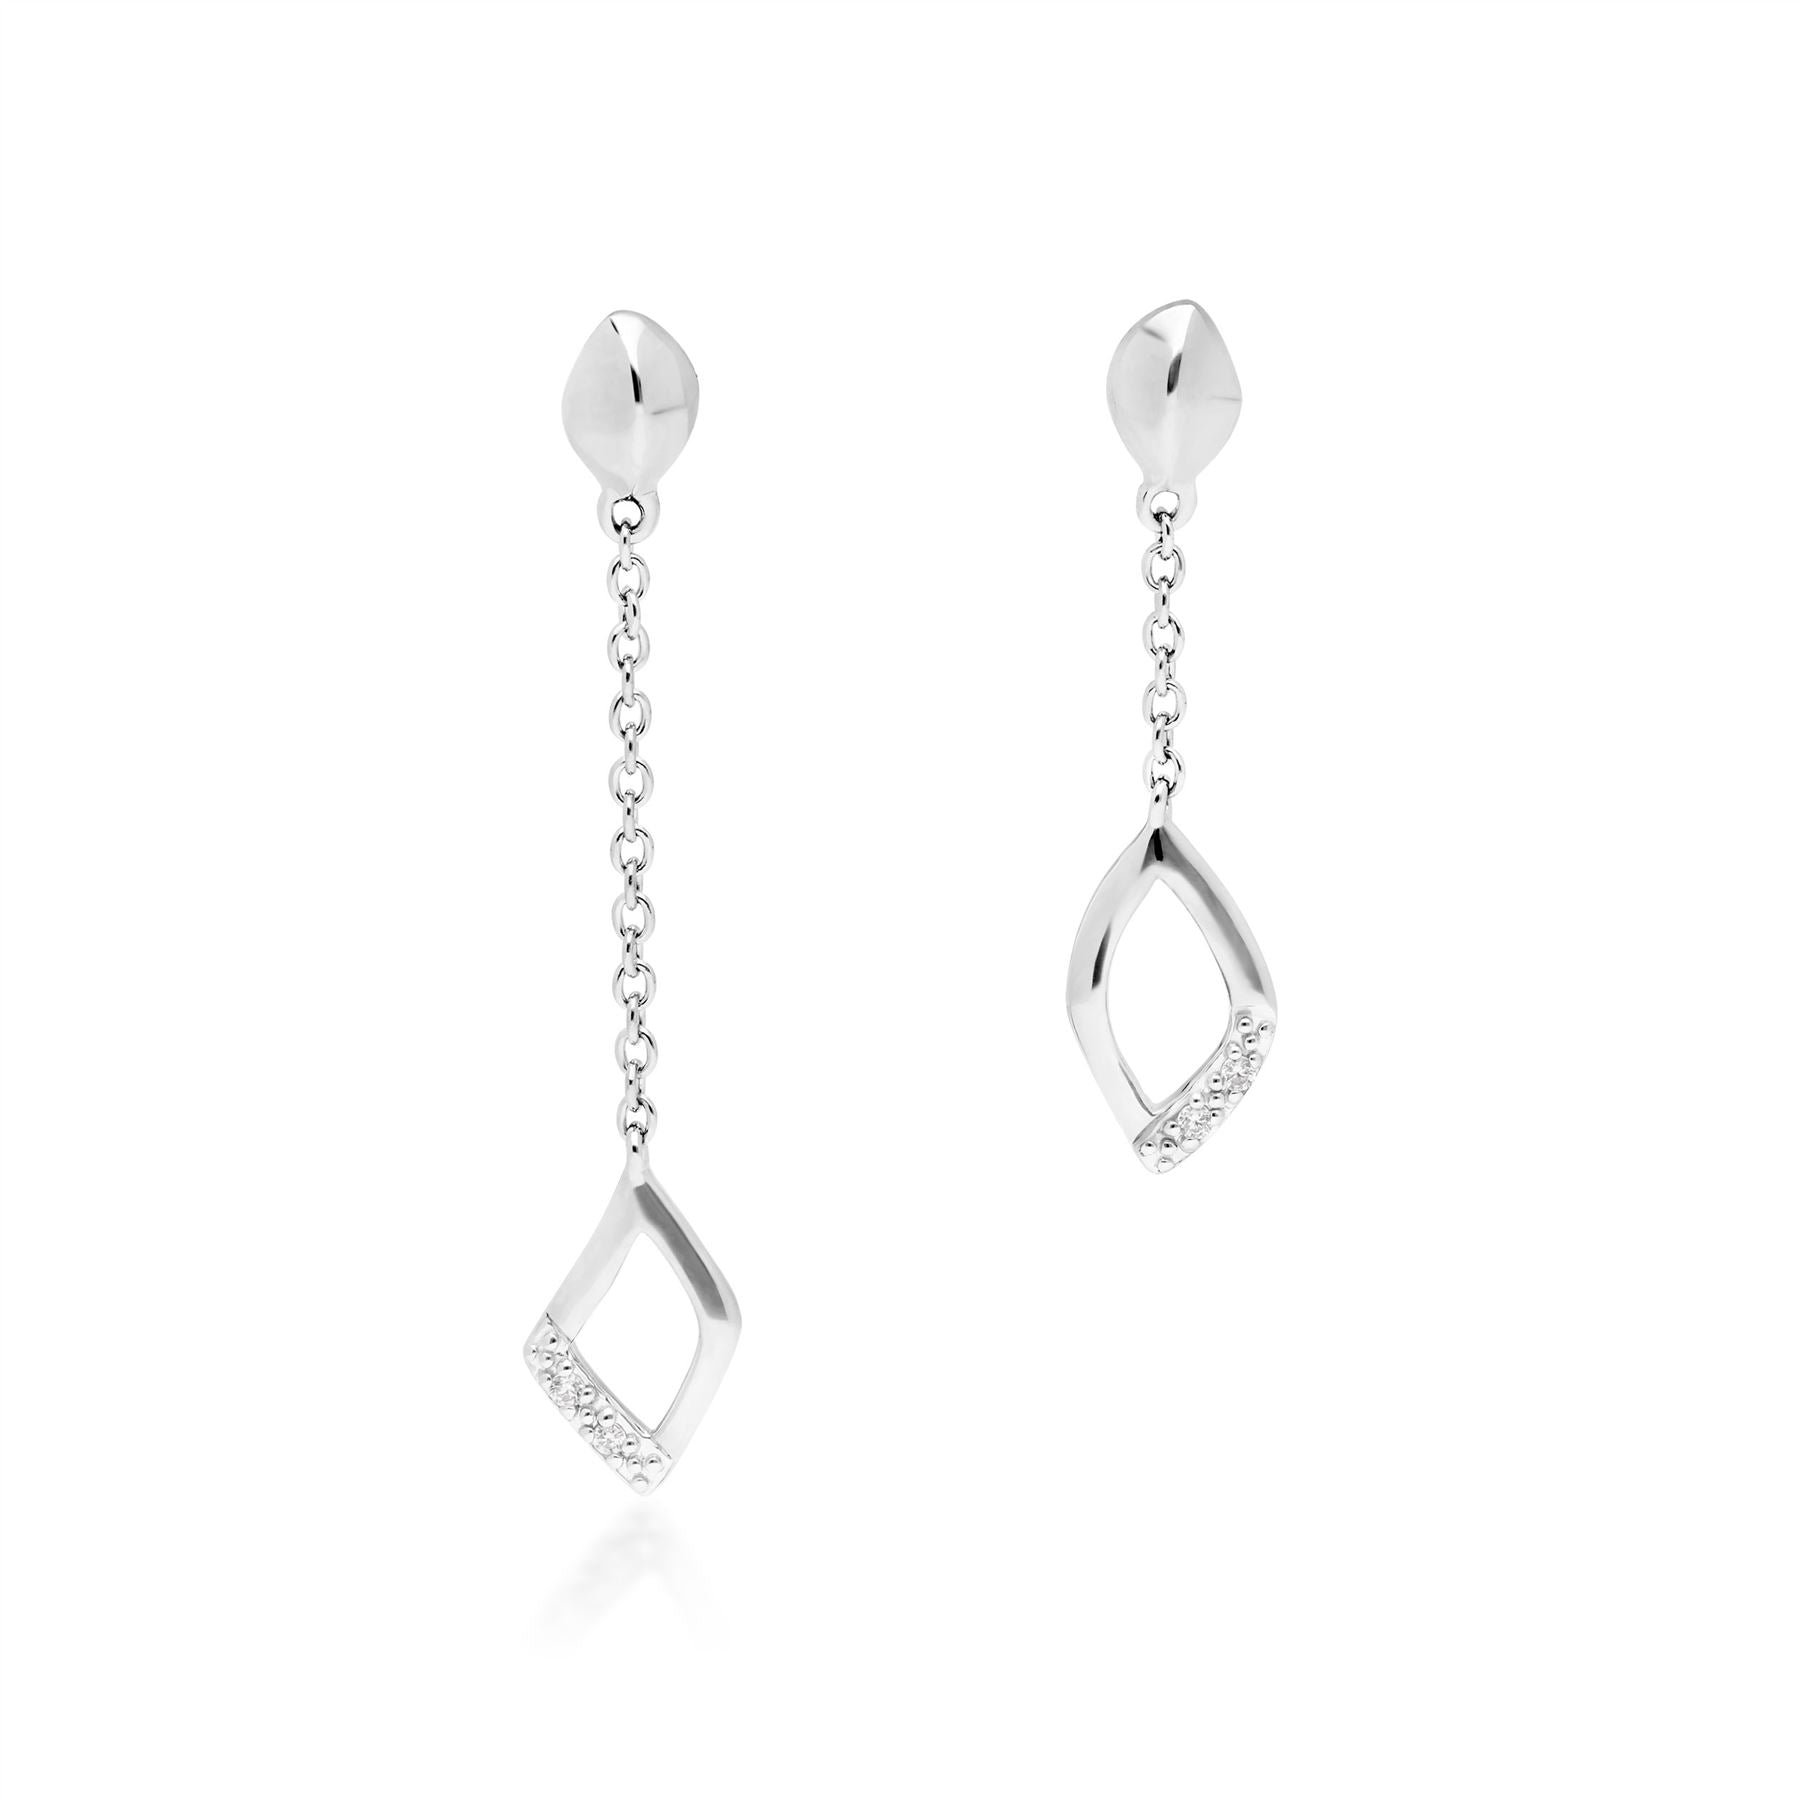 162E0274019 Diamond Pave Mismatched Dangle Drop Earrings in 9ct White Gold 2